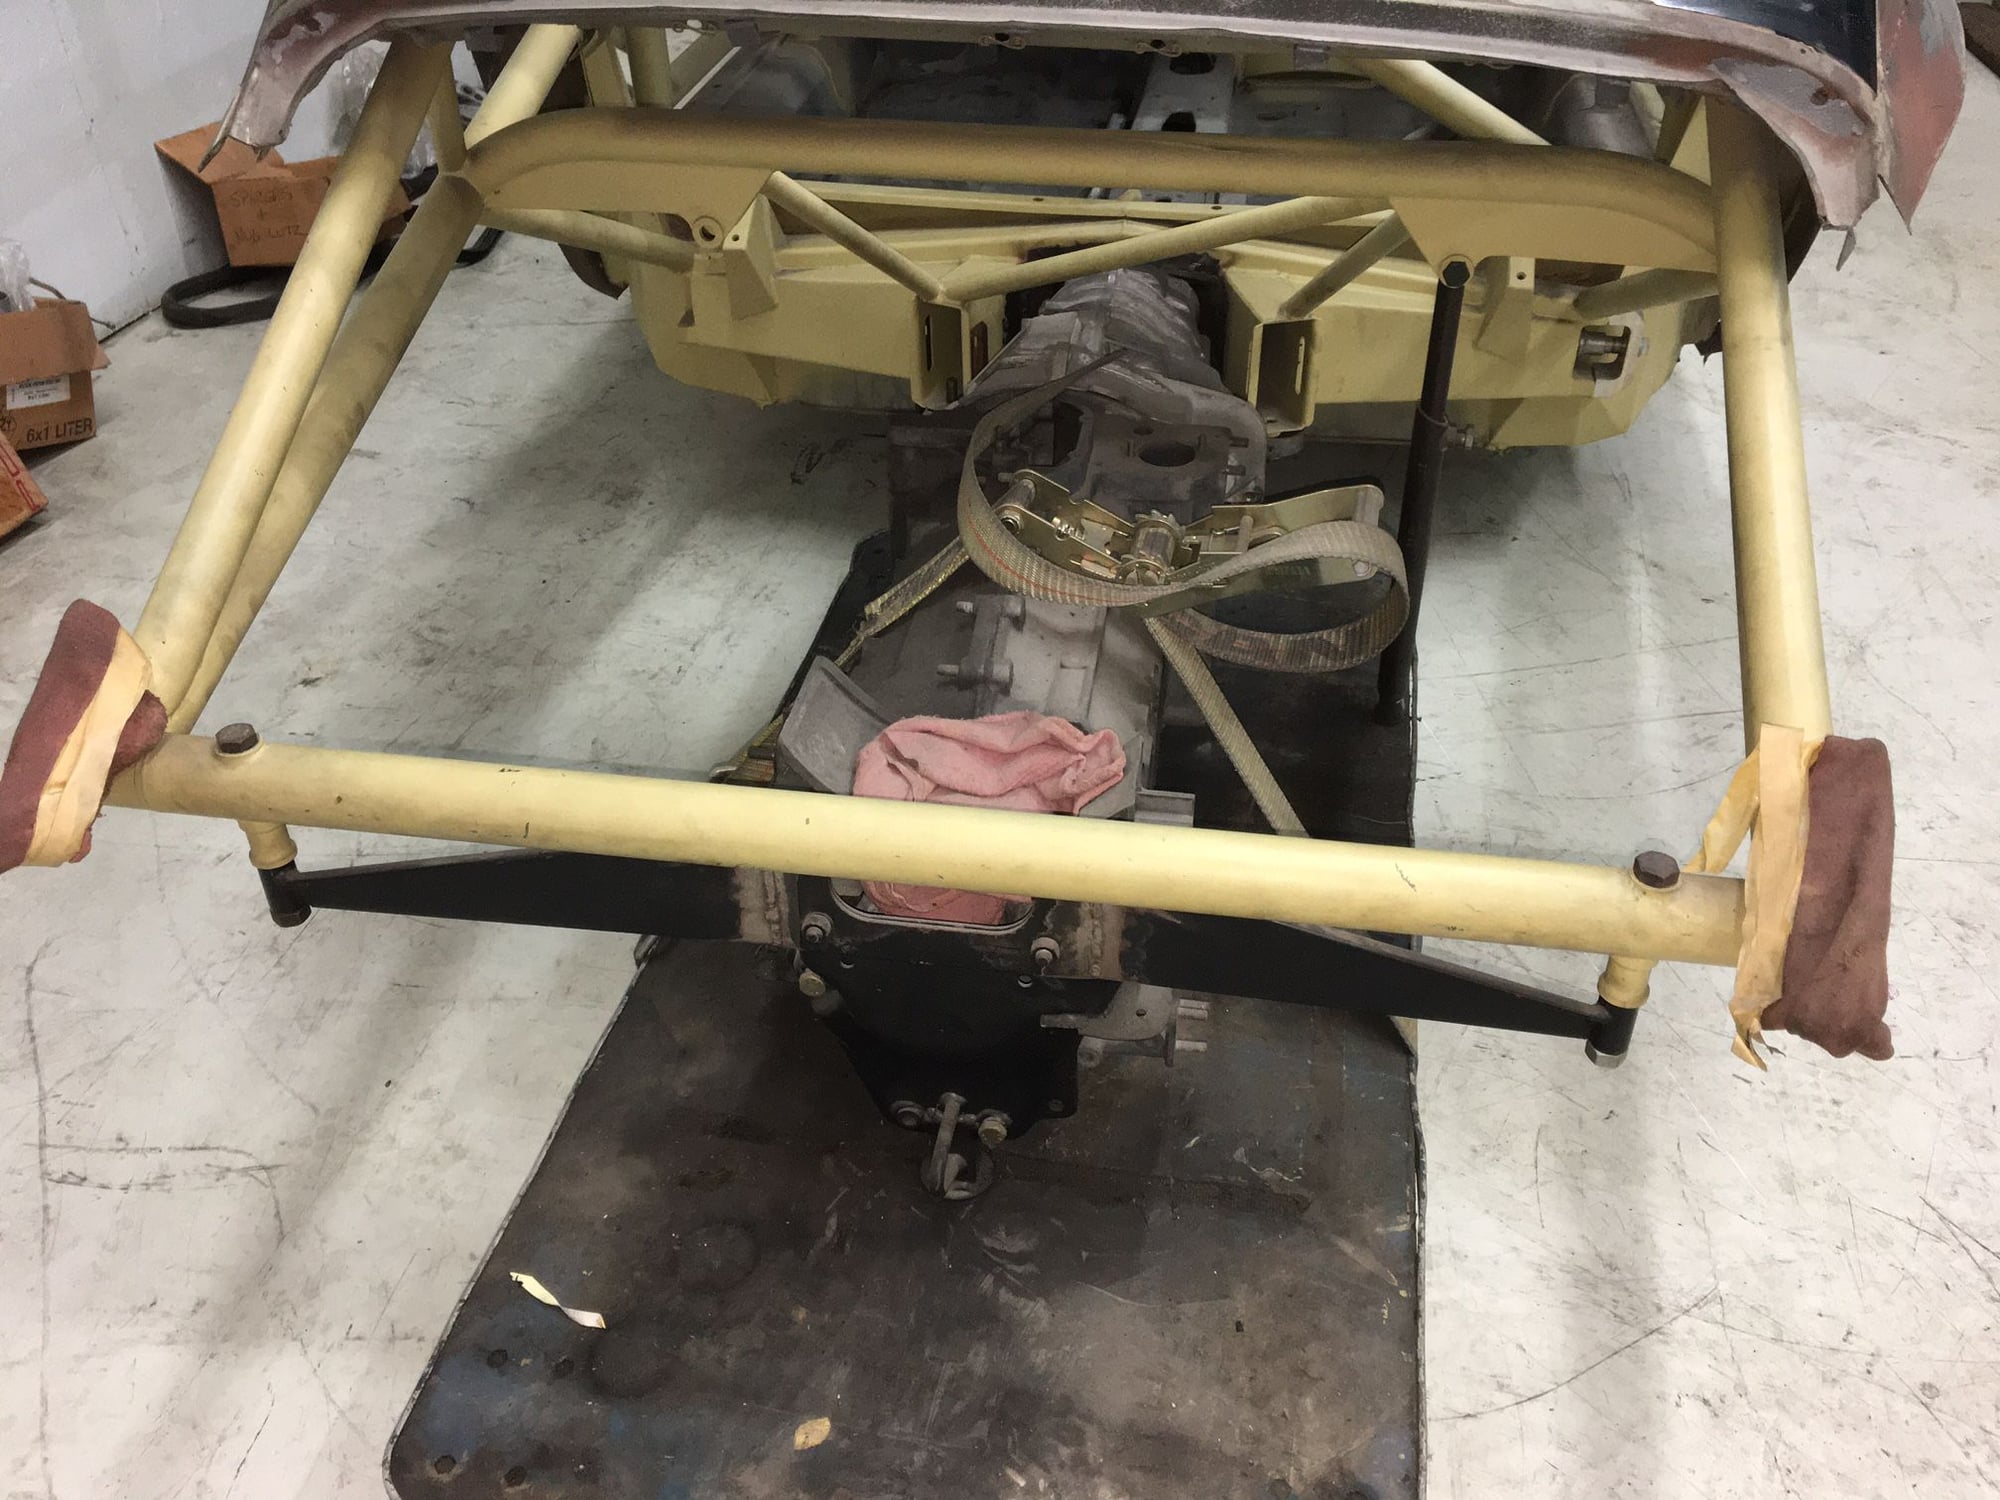 1983 Porsche 911 - 1983 911 FABCAR Tube frame project - Used - VIN WP0AA0913DS120379 - 2WD - Manual - Coupe - Joliet, IL 60436, United States